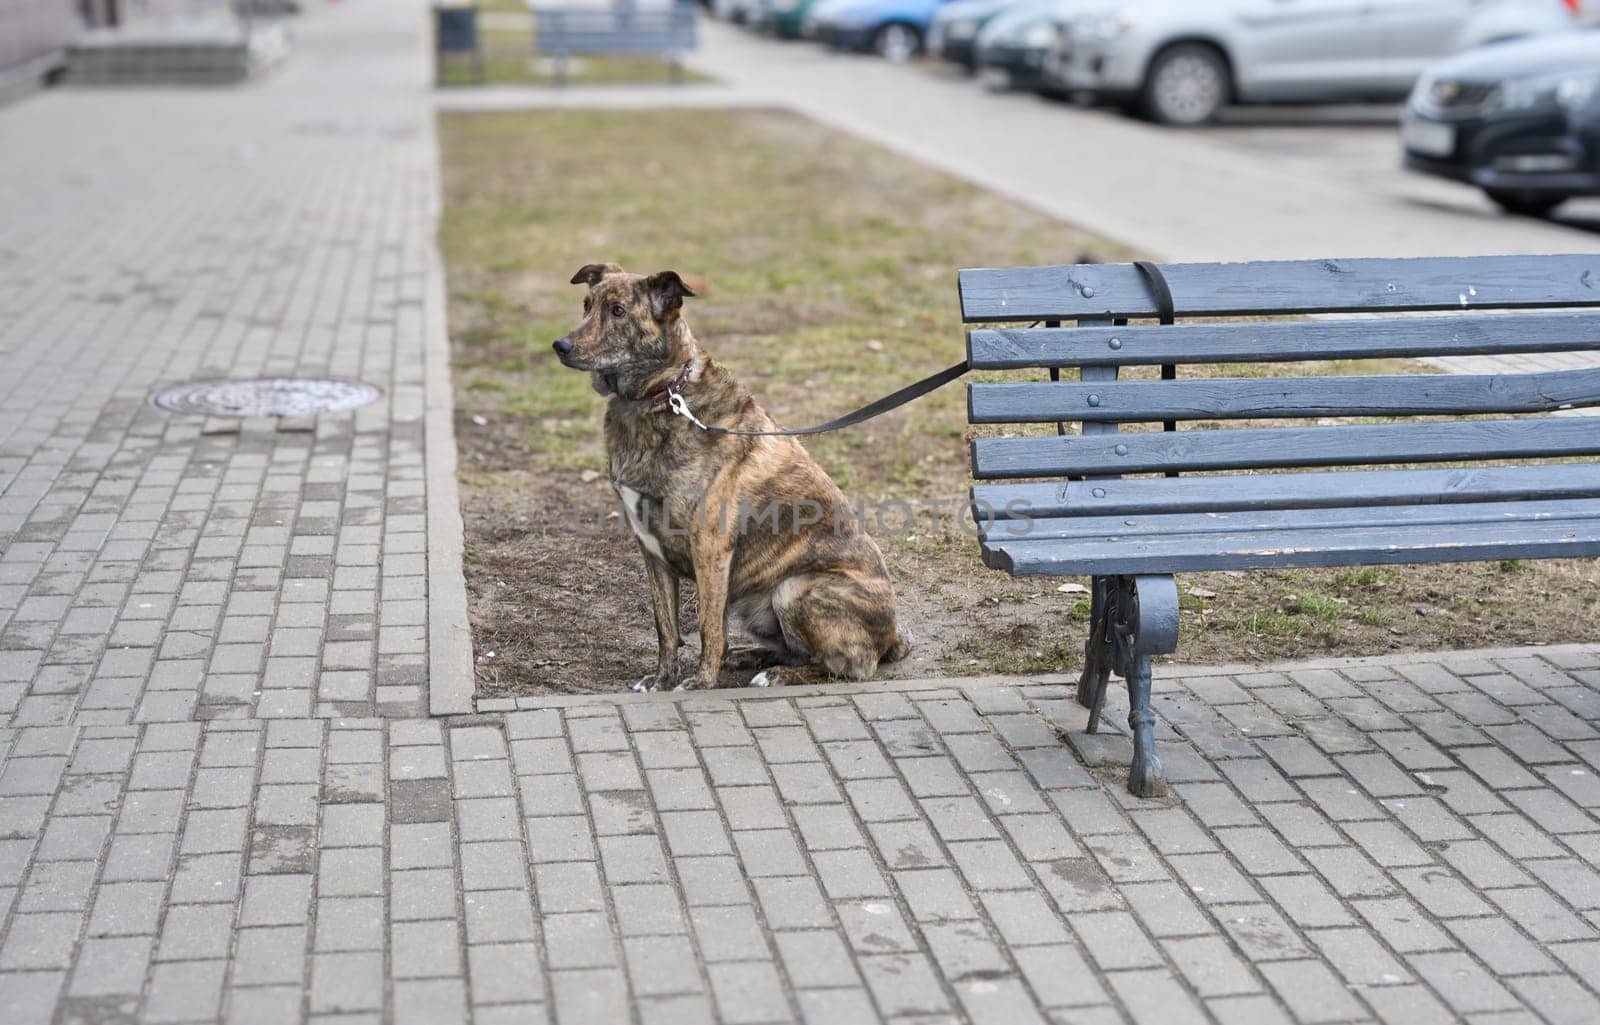 Near the market, a dog tied to a bench is waiting for its owner.